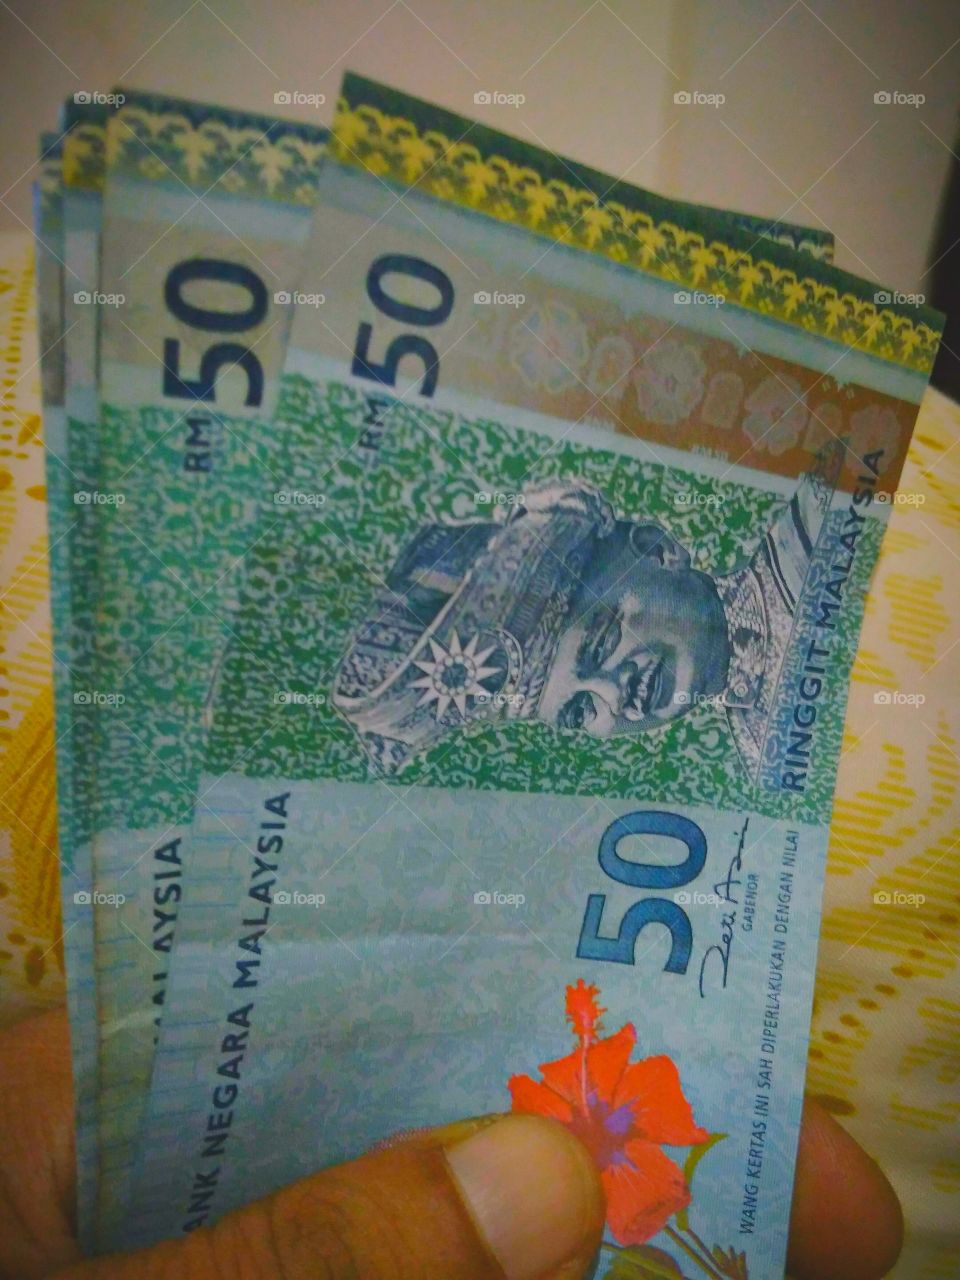 Cash from malay